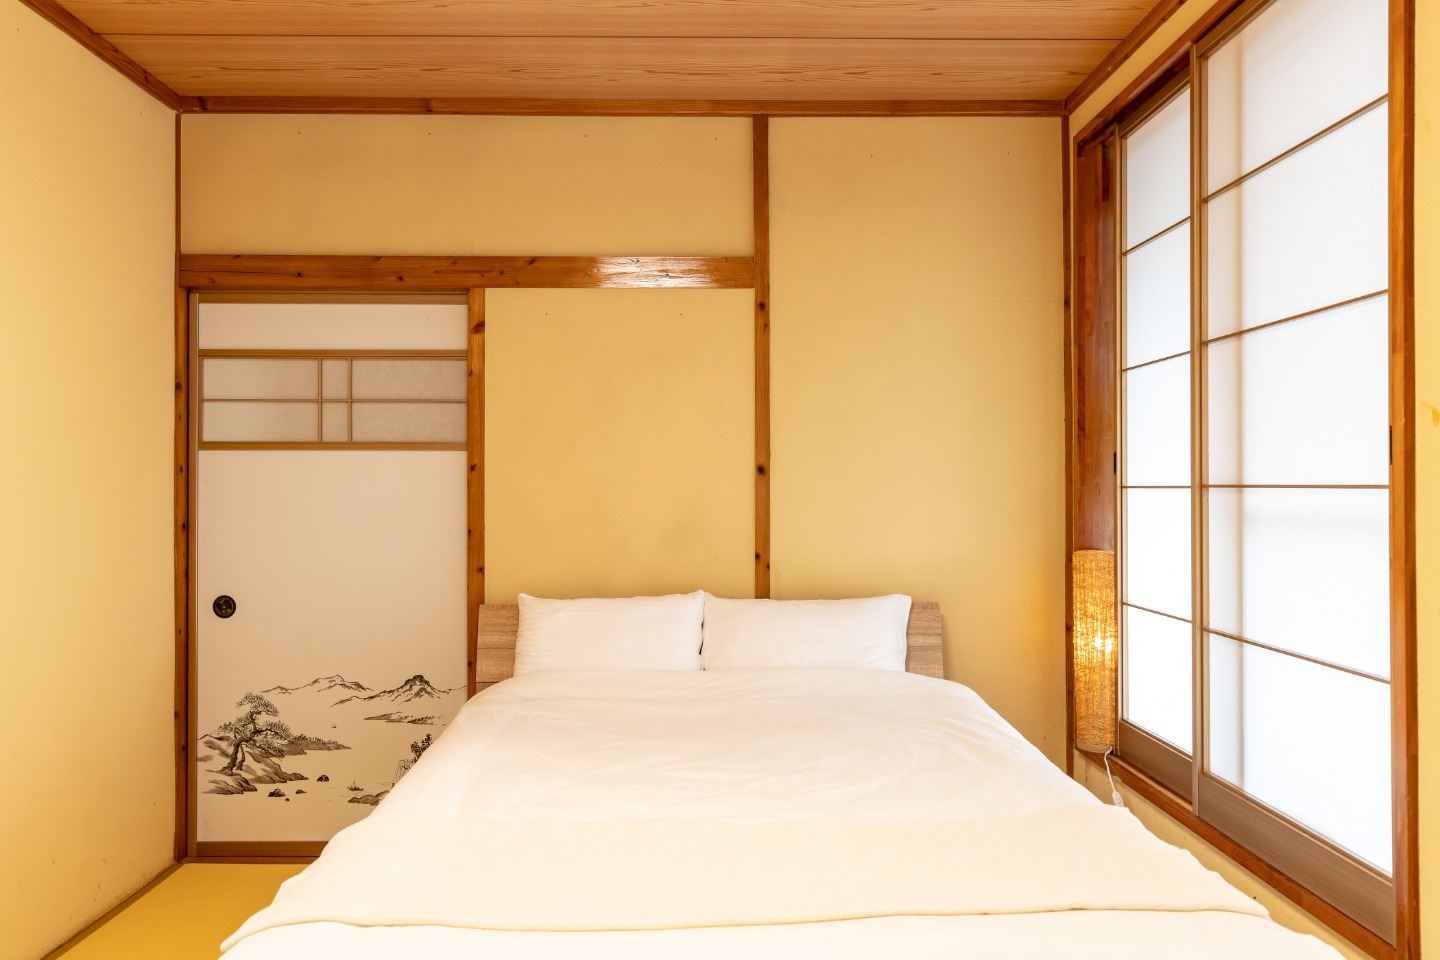 Tatami Room with Double Bed ＜ダブルベッド＞